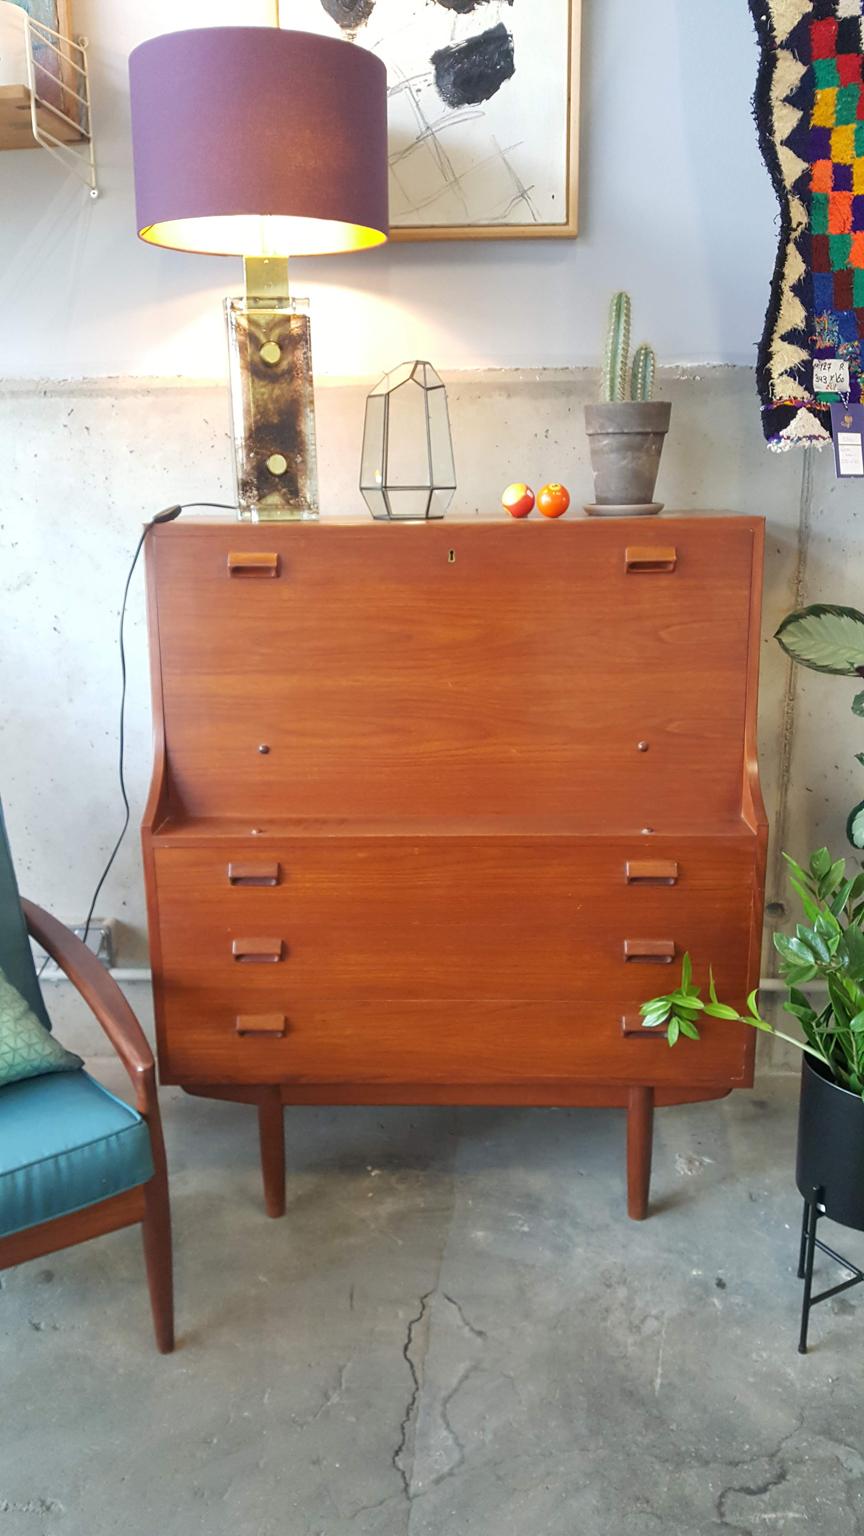 Danish teak secretary from the 1960s. Designed by Børge Mogensen and manufactured by Søborg Møbelfabrik in the 1950s. The legs make the piece of furniture light and easy to combine with other furniture. The workmanship is very high quality and the